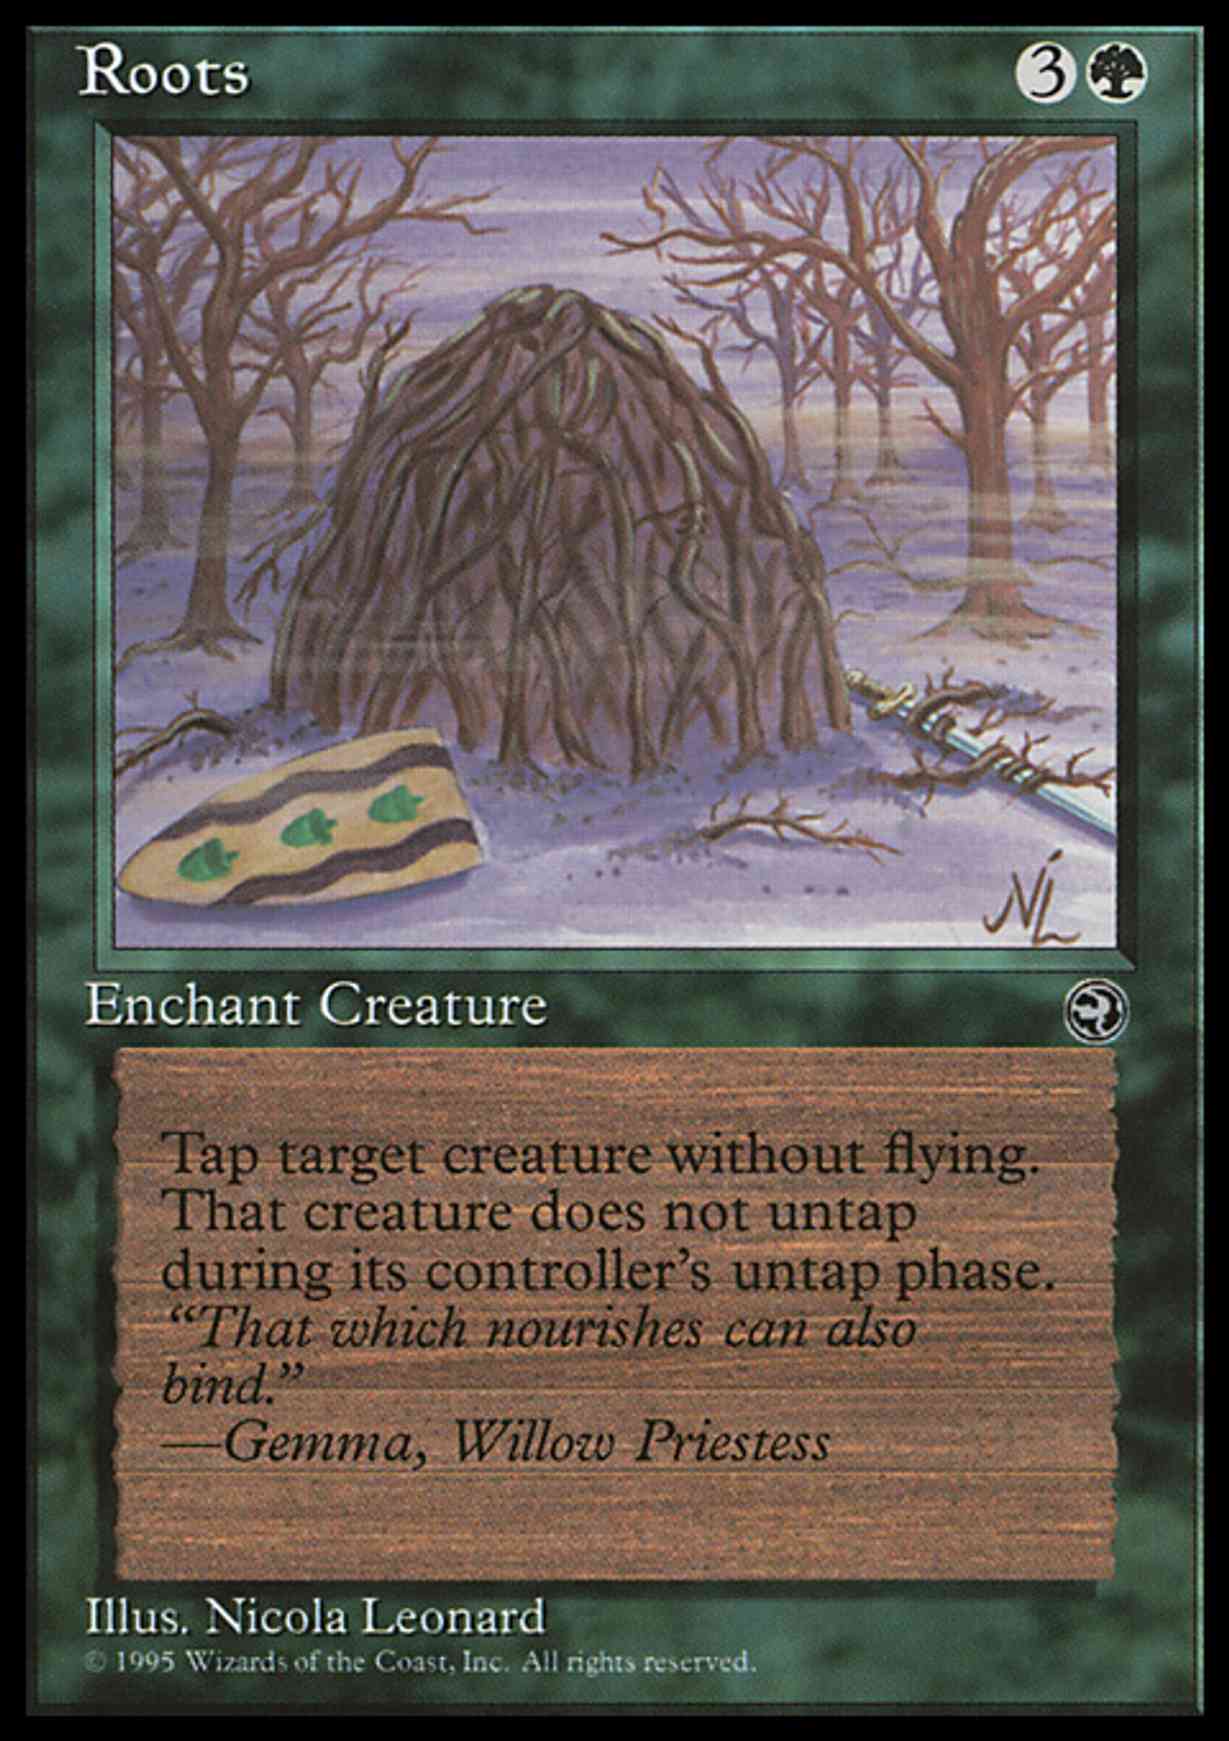 Roots magic card front